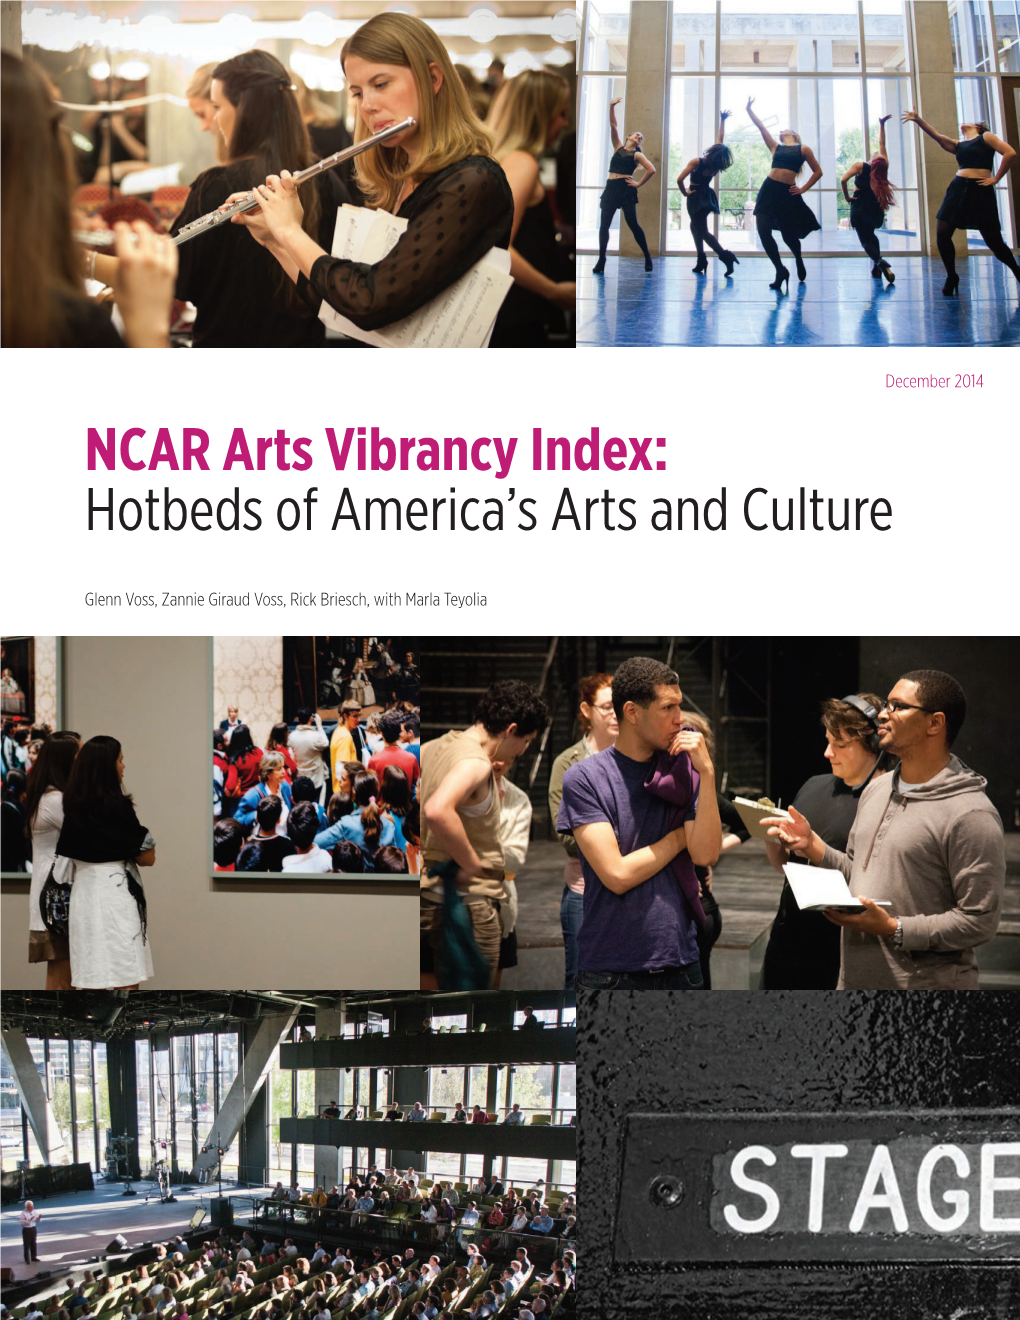 NCAR Arts Vibrancy Index: Hotbeds of America's Arts and Culture